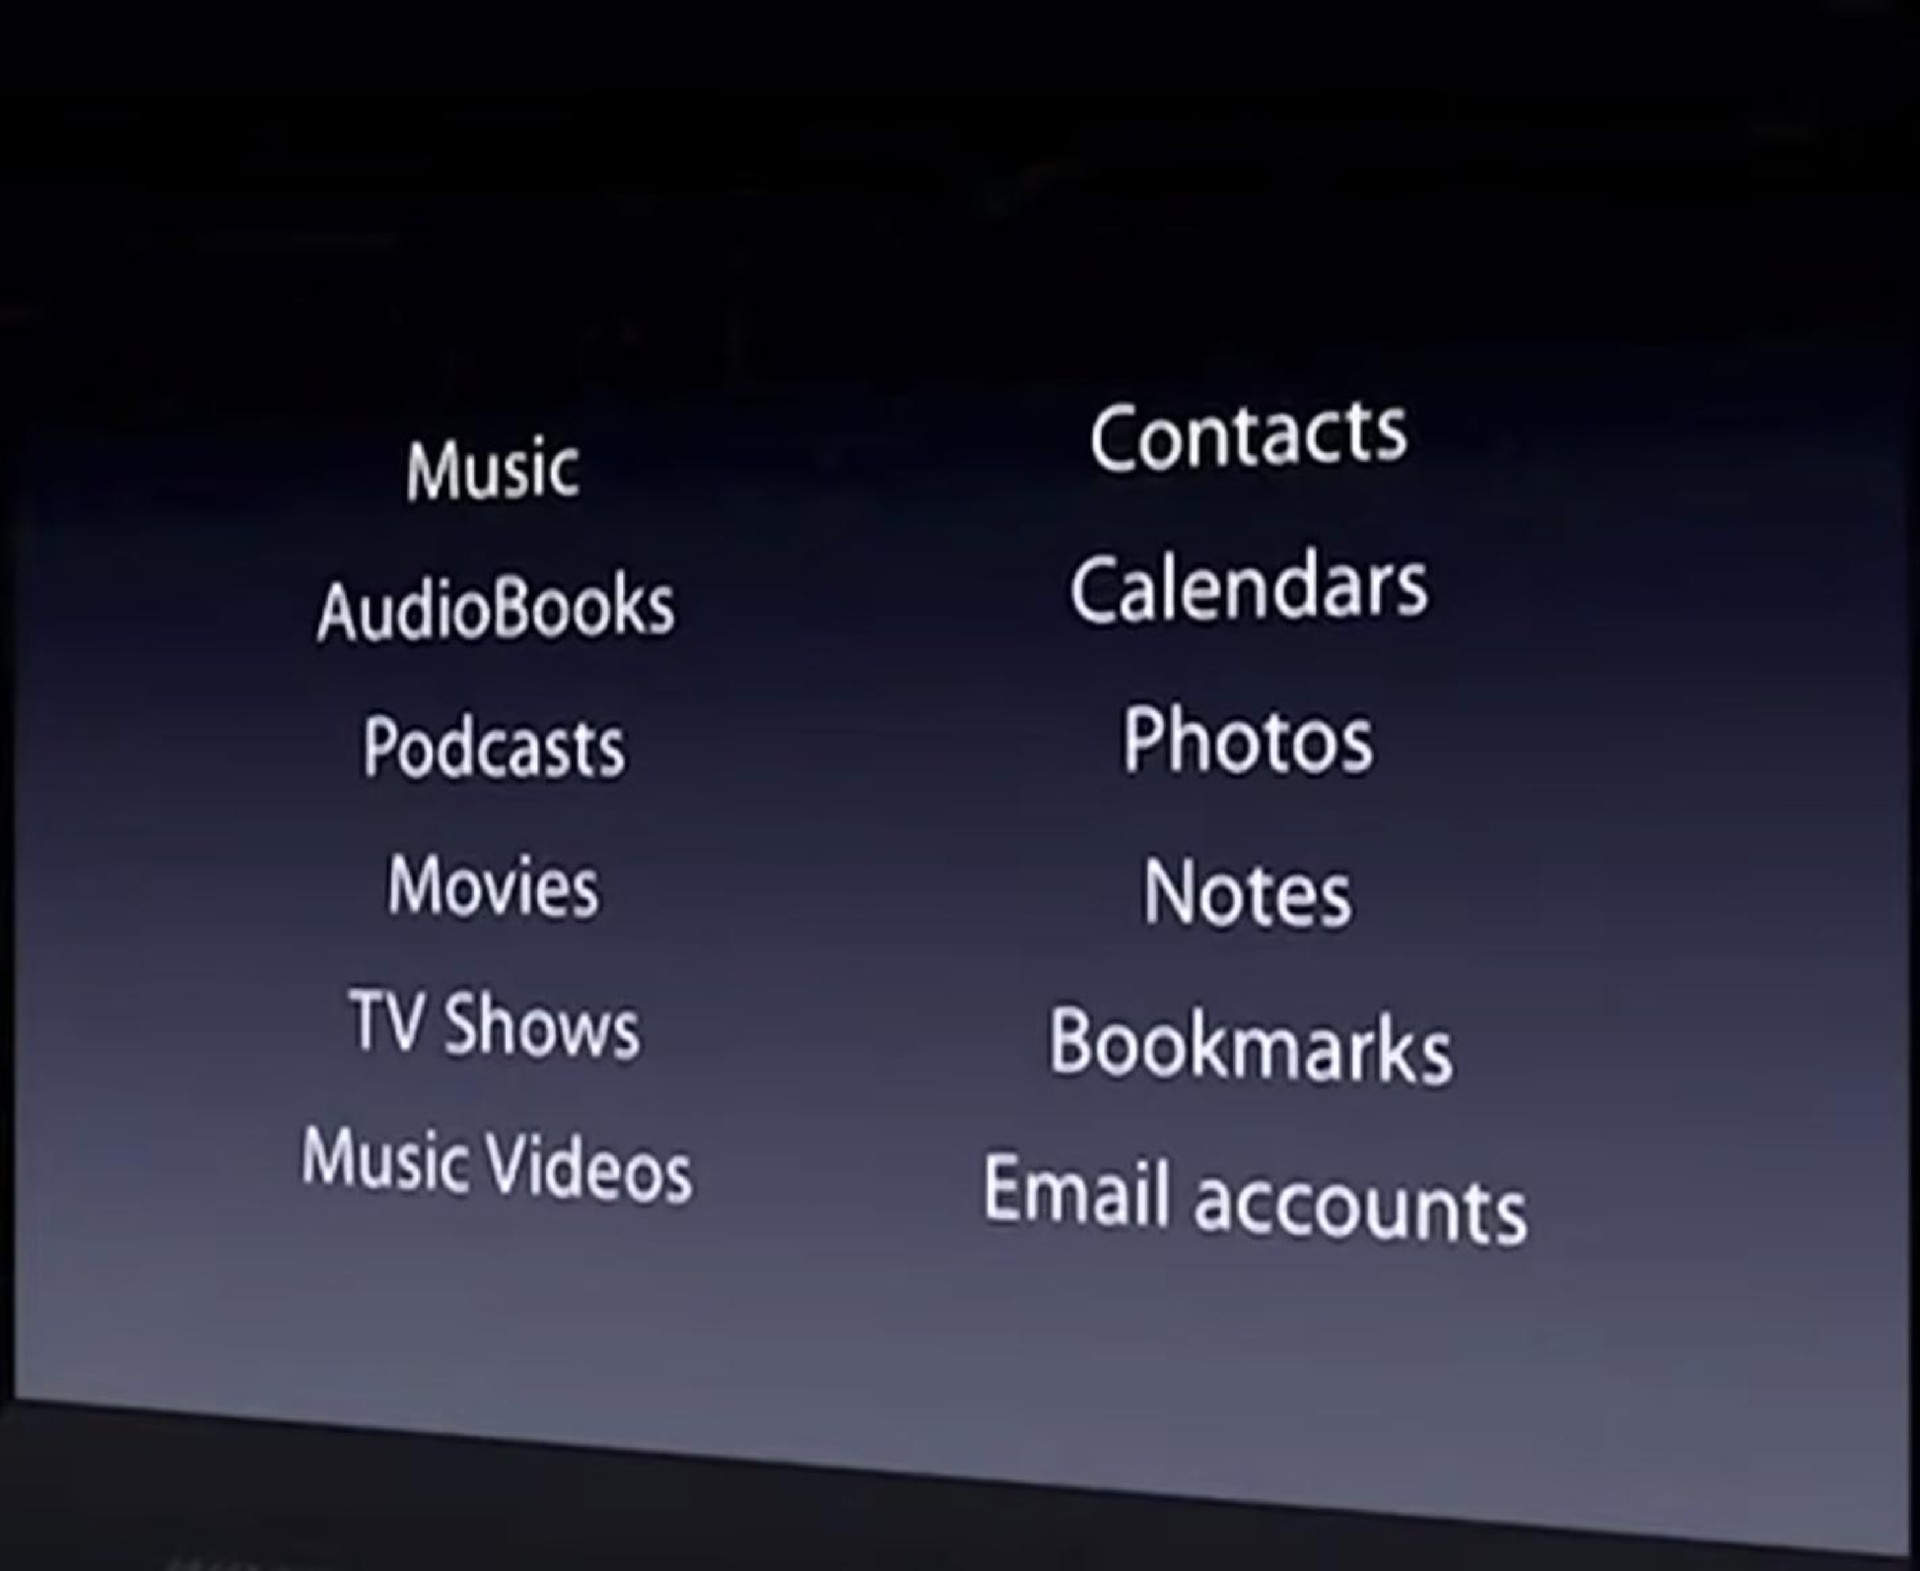 music contacts calendars tes movies shows notes bookmarks | Apple